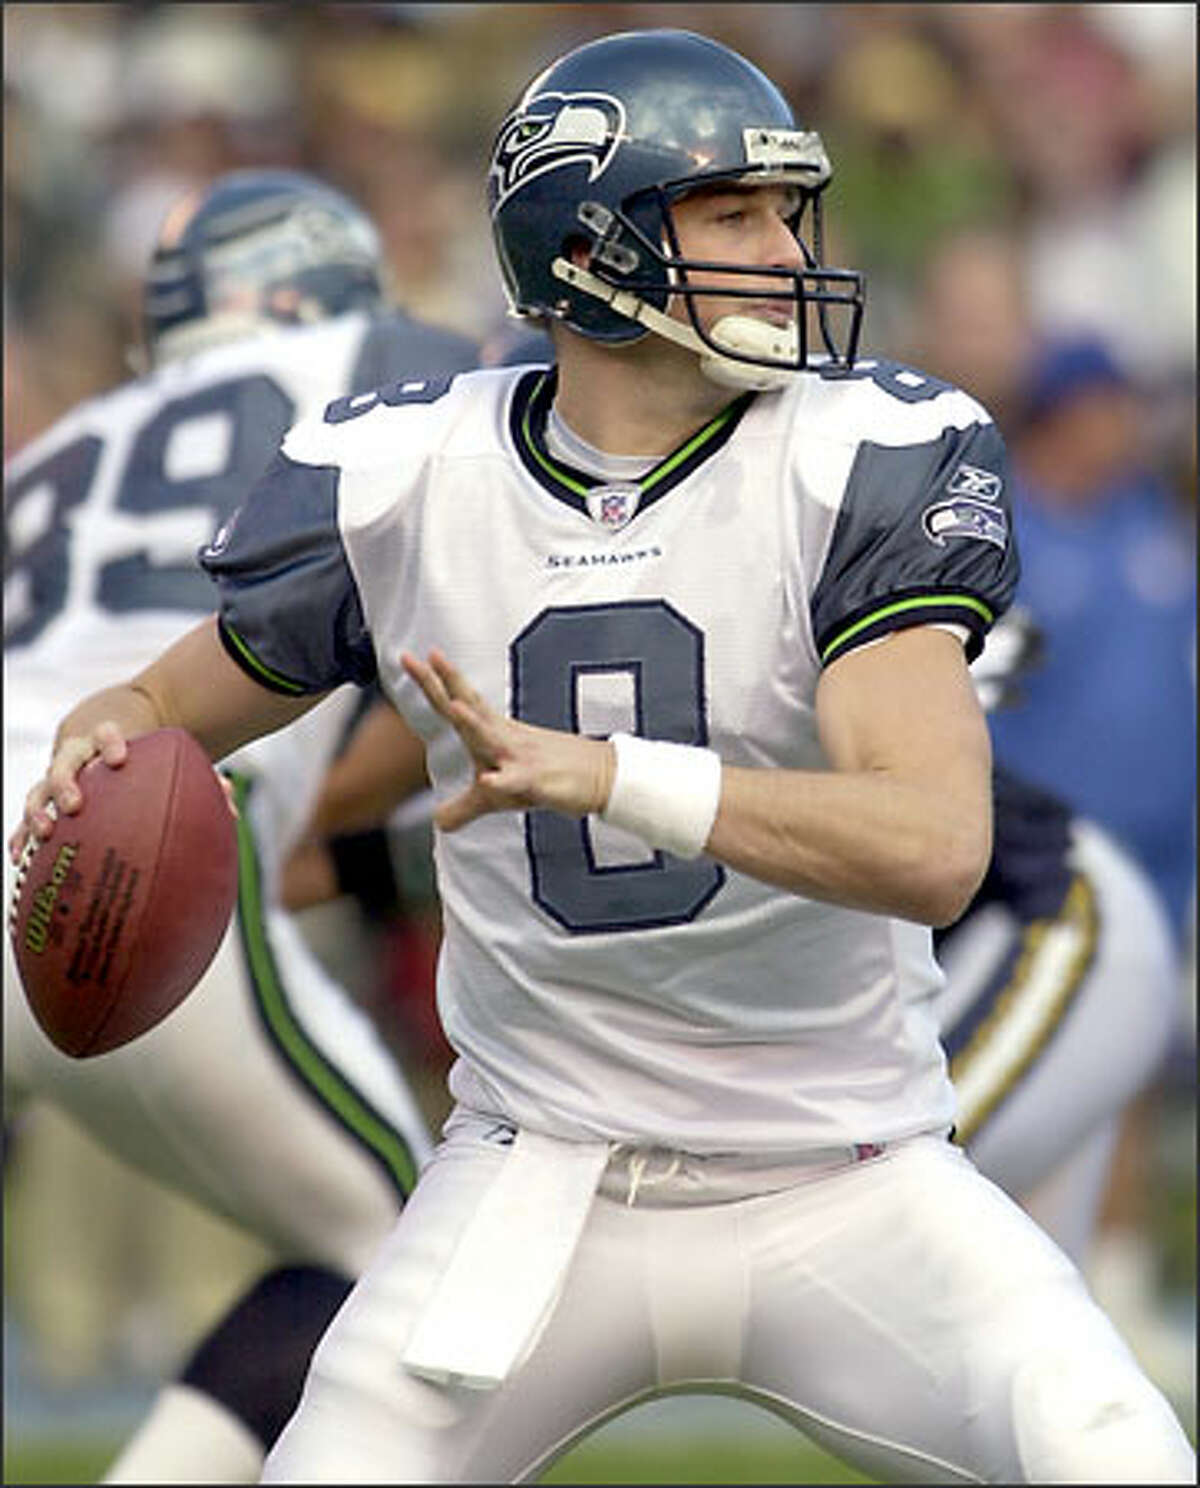 Matt Hasselbeck threw two touchdown passes, lead the Seahawks to a 31-28 comeback victory in overtime.